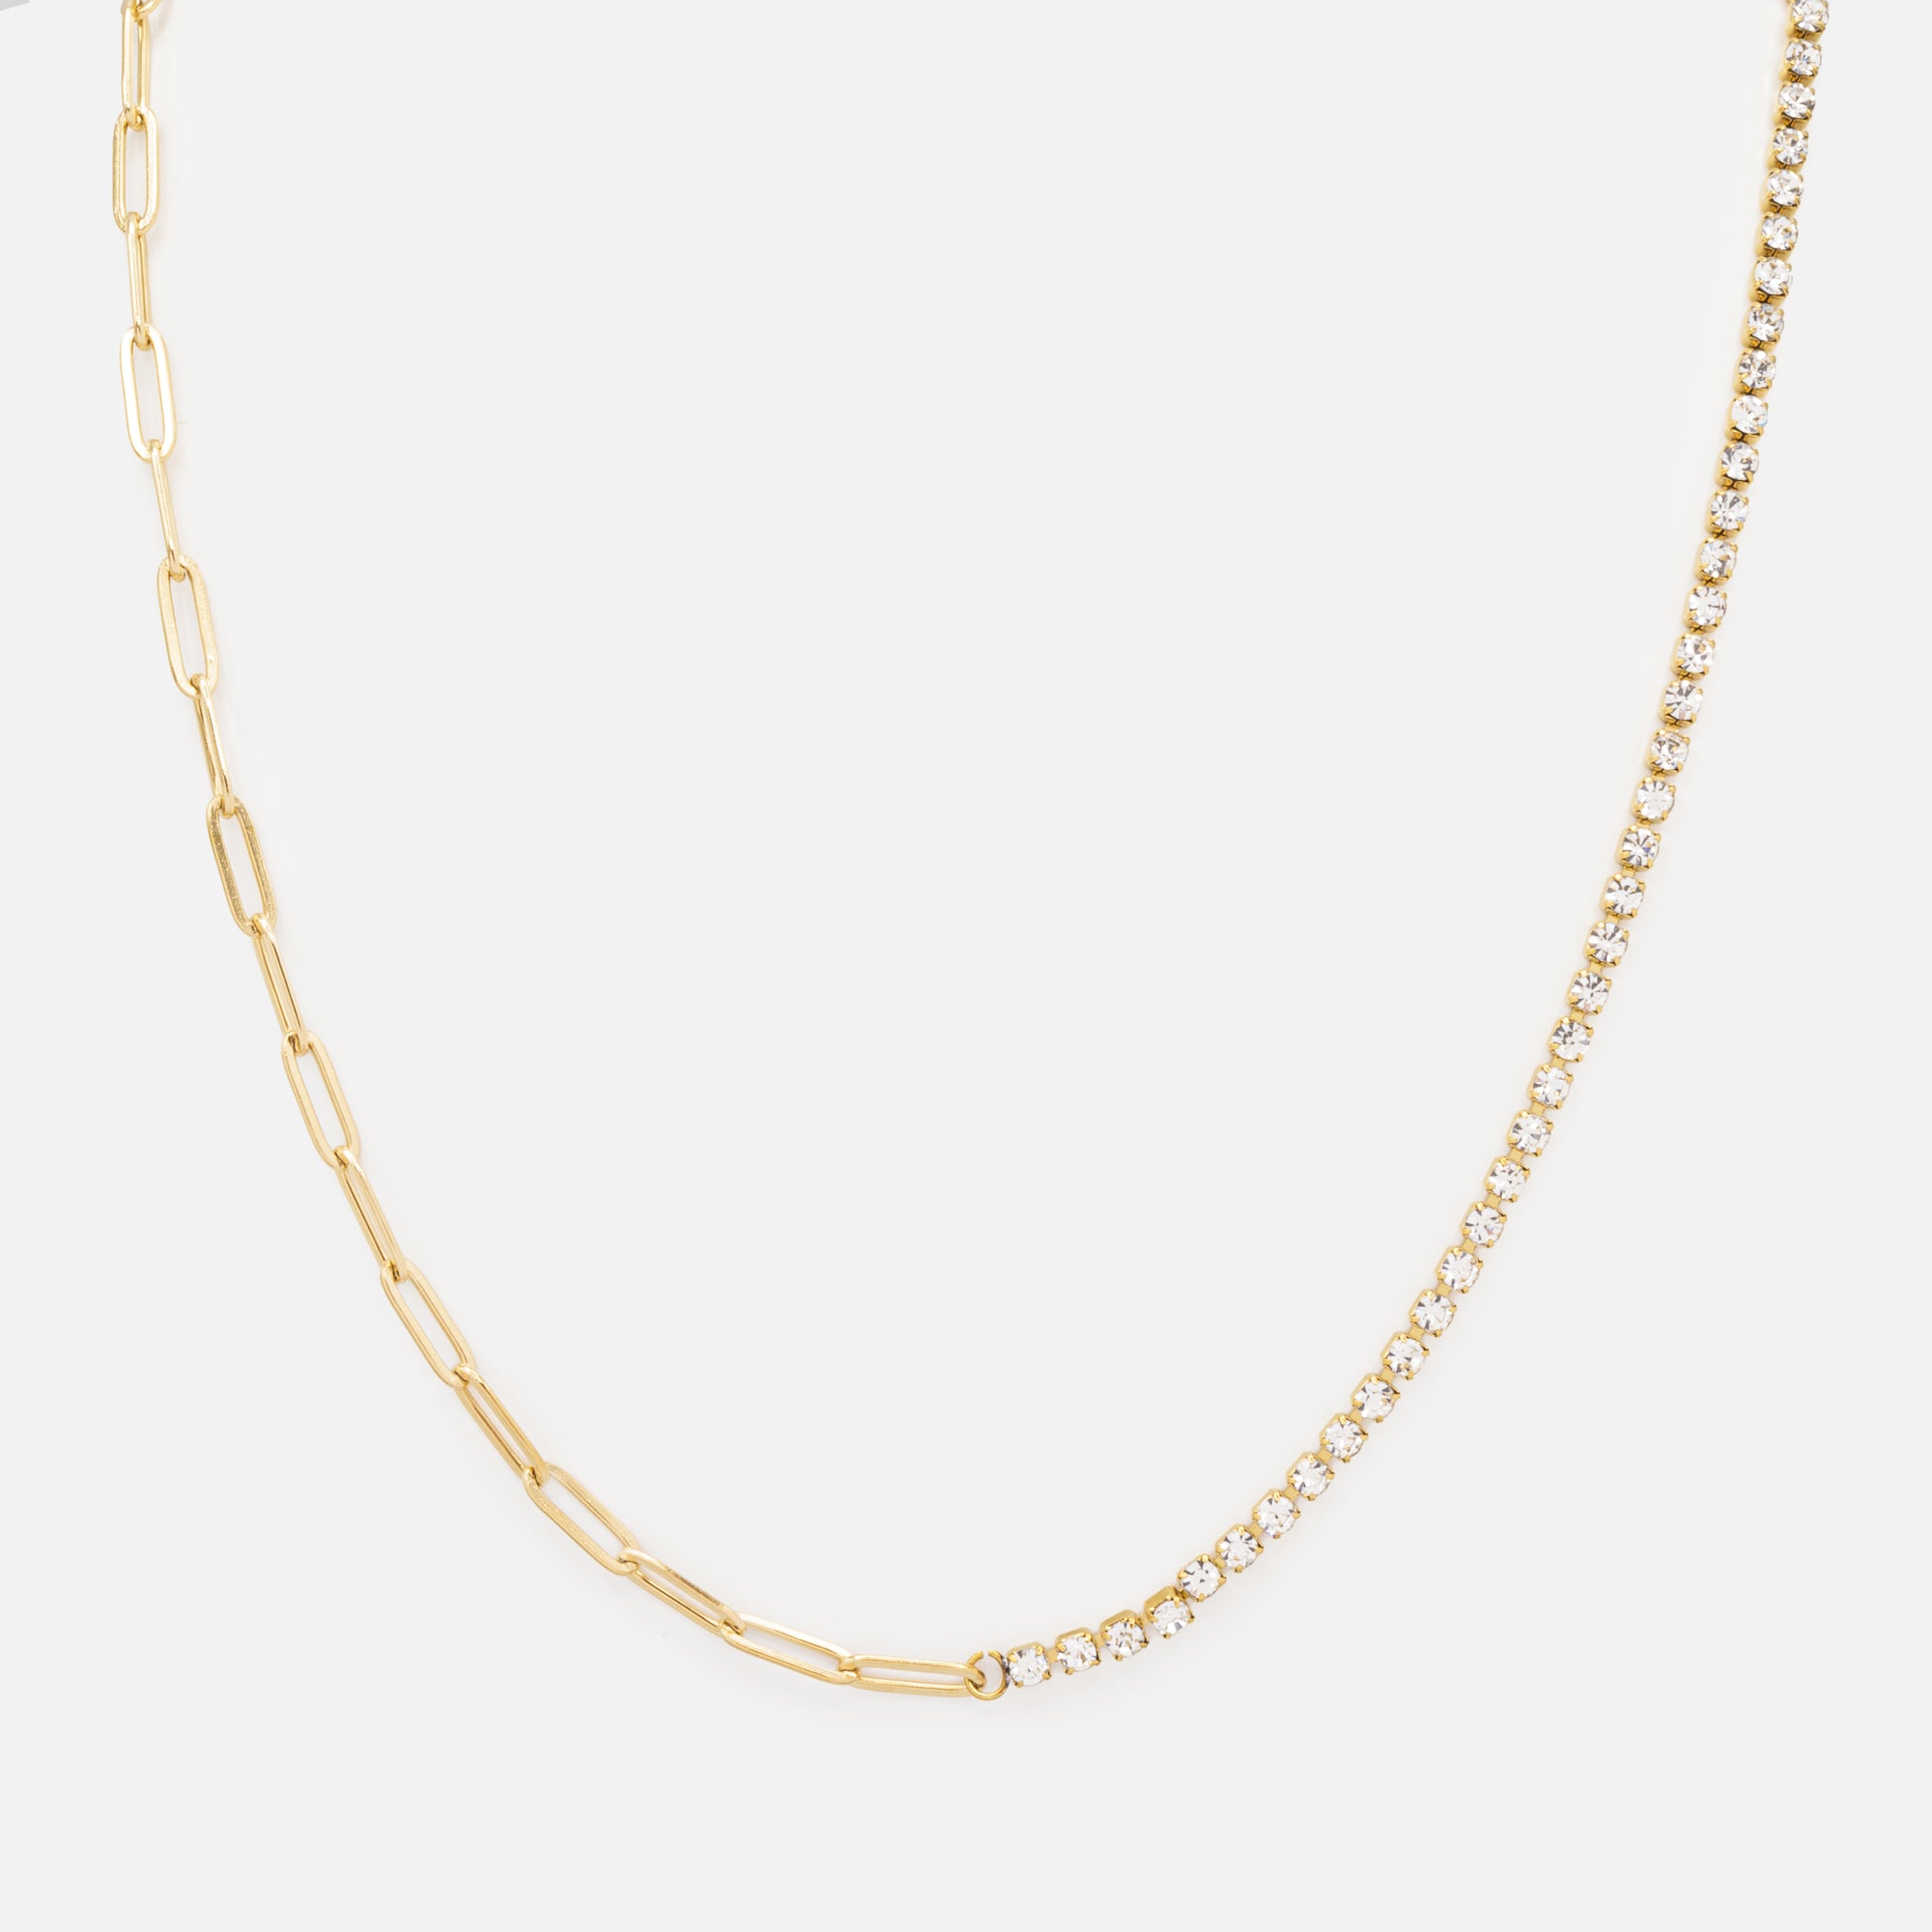 Gold river necklace and bracelet set of cubic zirconia and stainless steel paper clip links